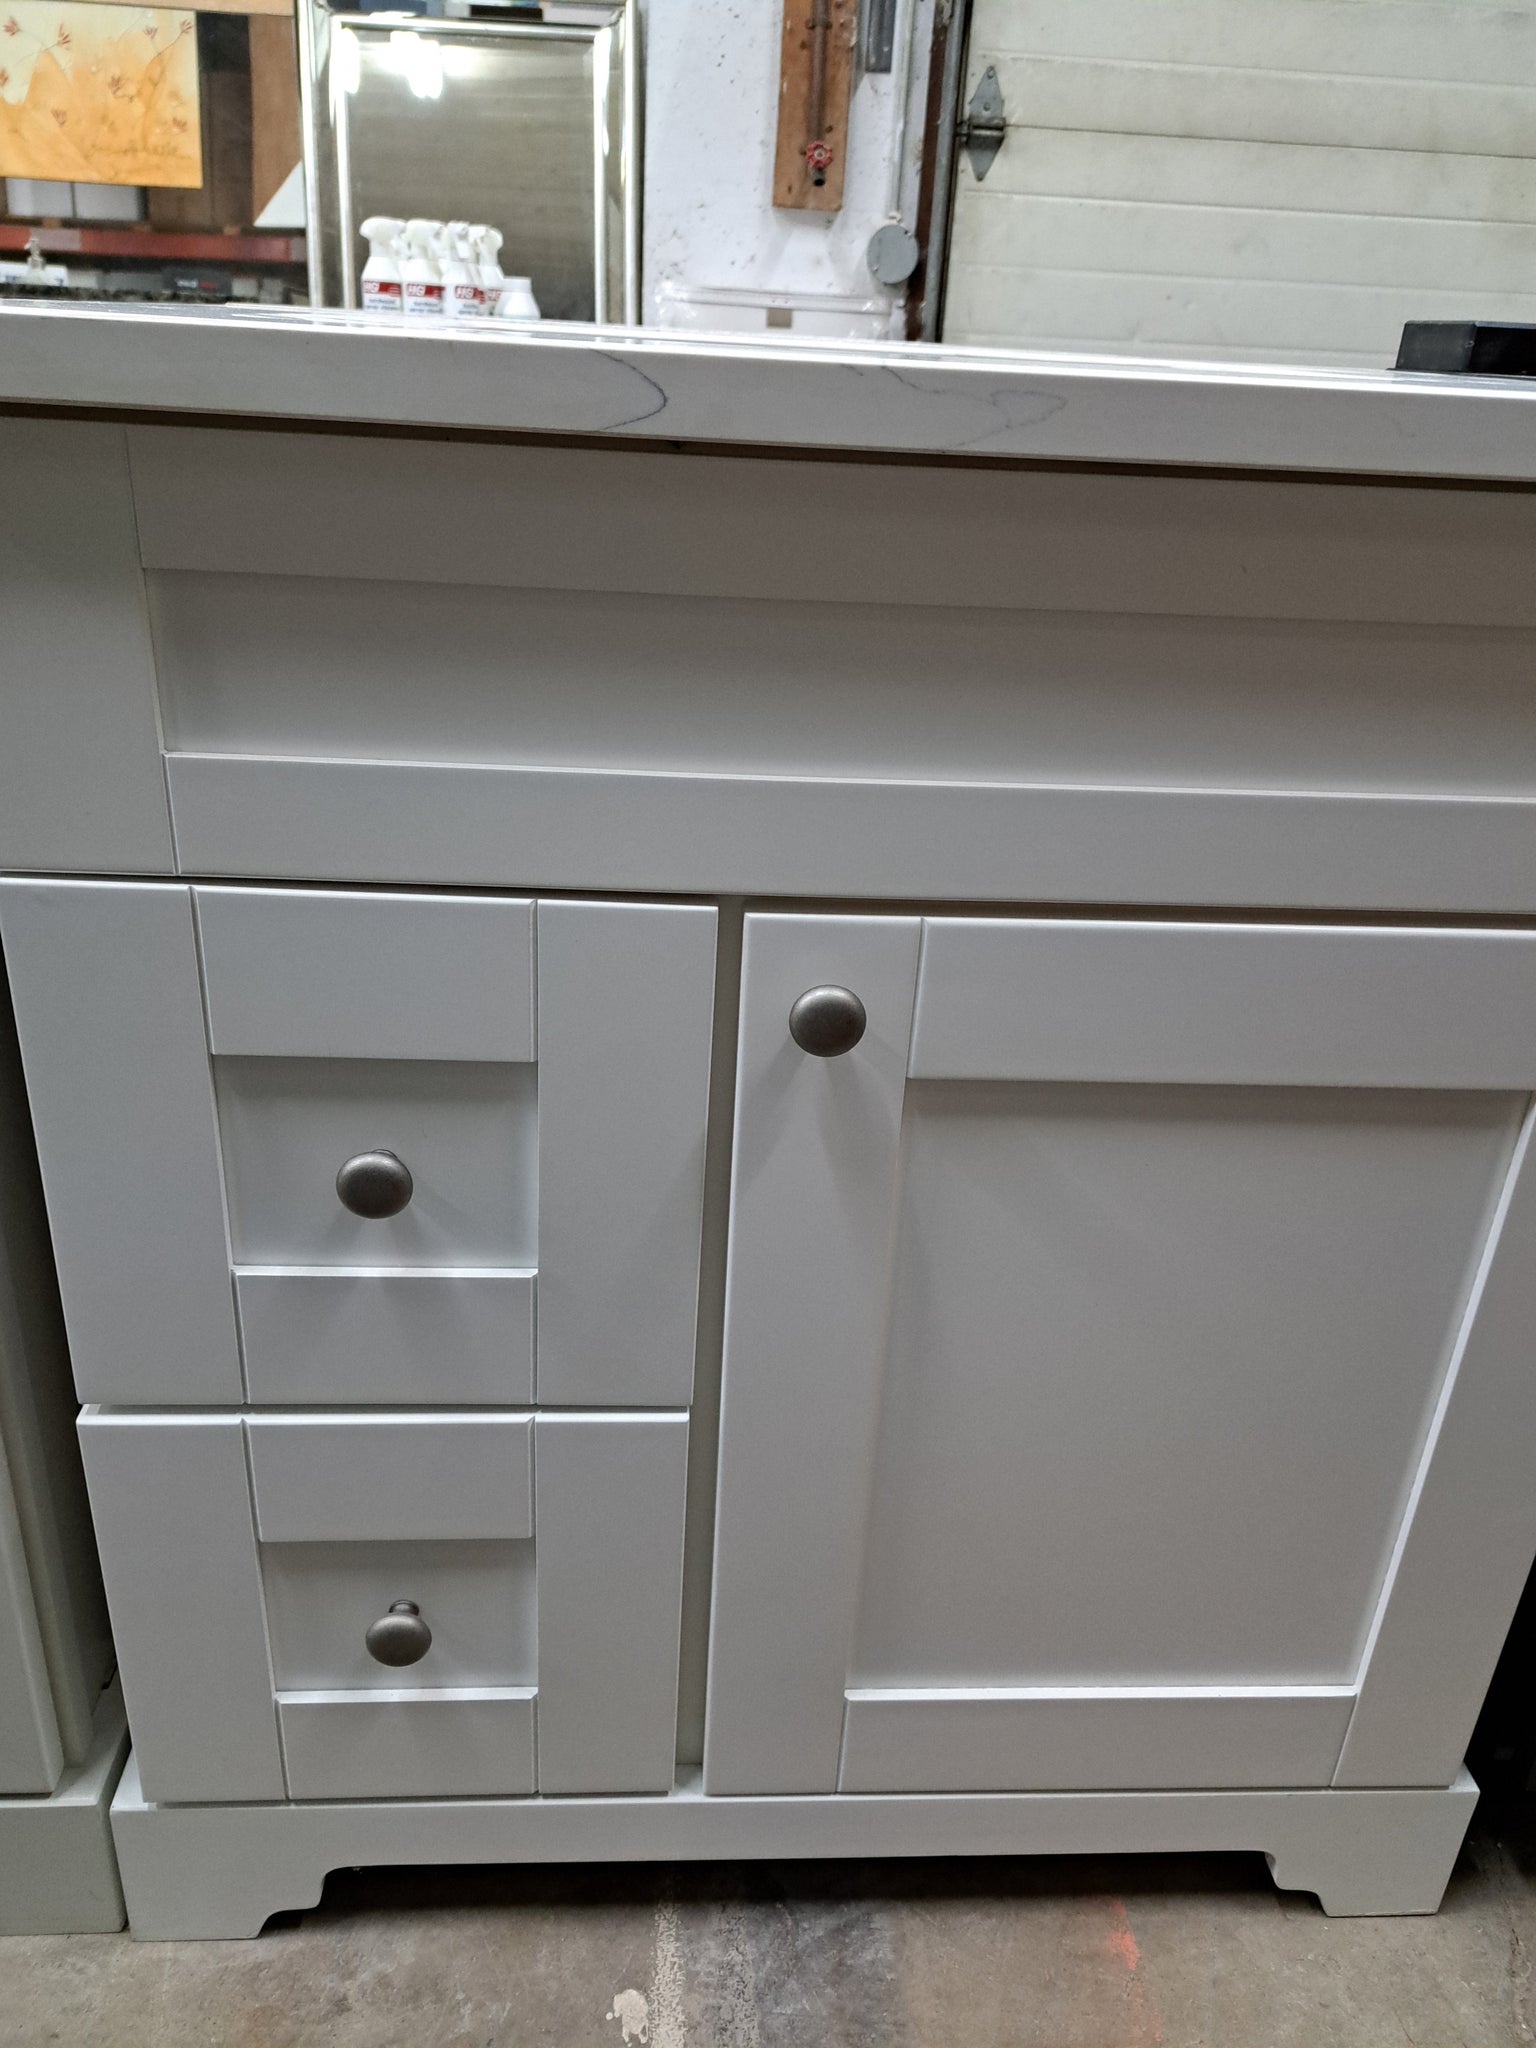 VANITY WHITE WITH CARRERA QUARTZ TOP (3 HOLES) AND SINK $ 800